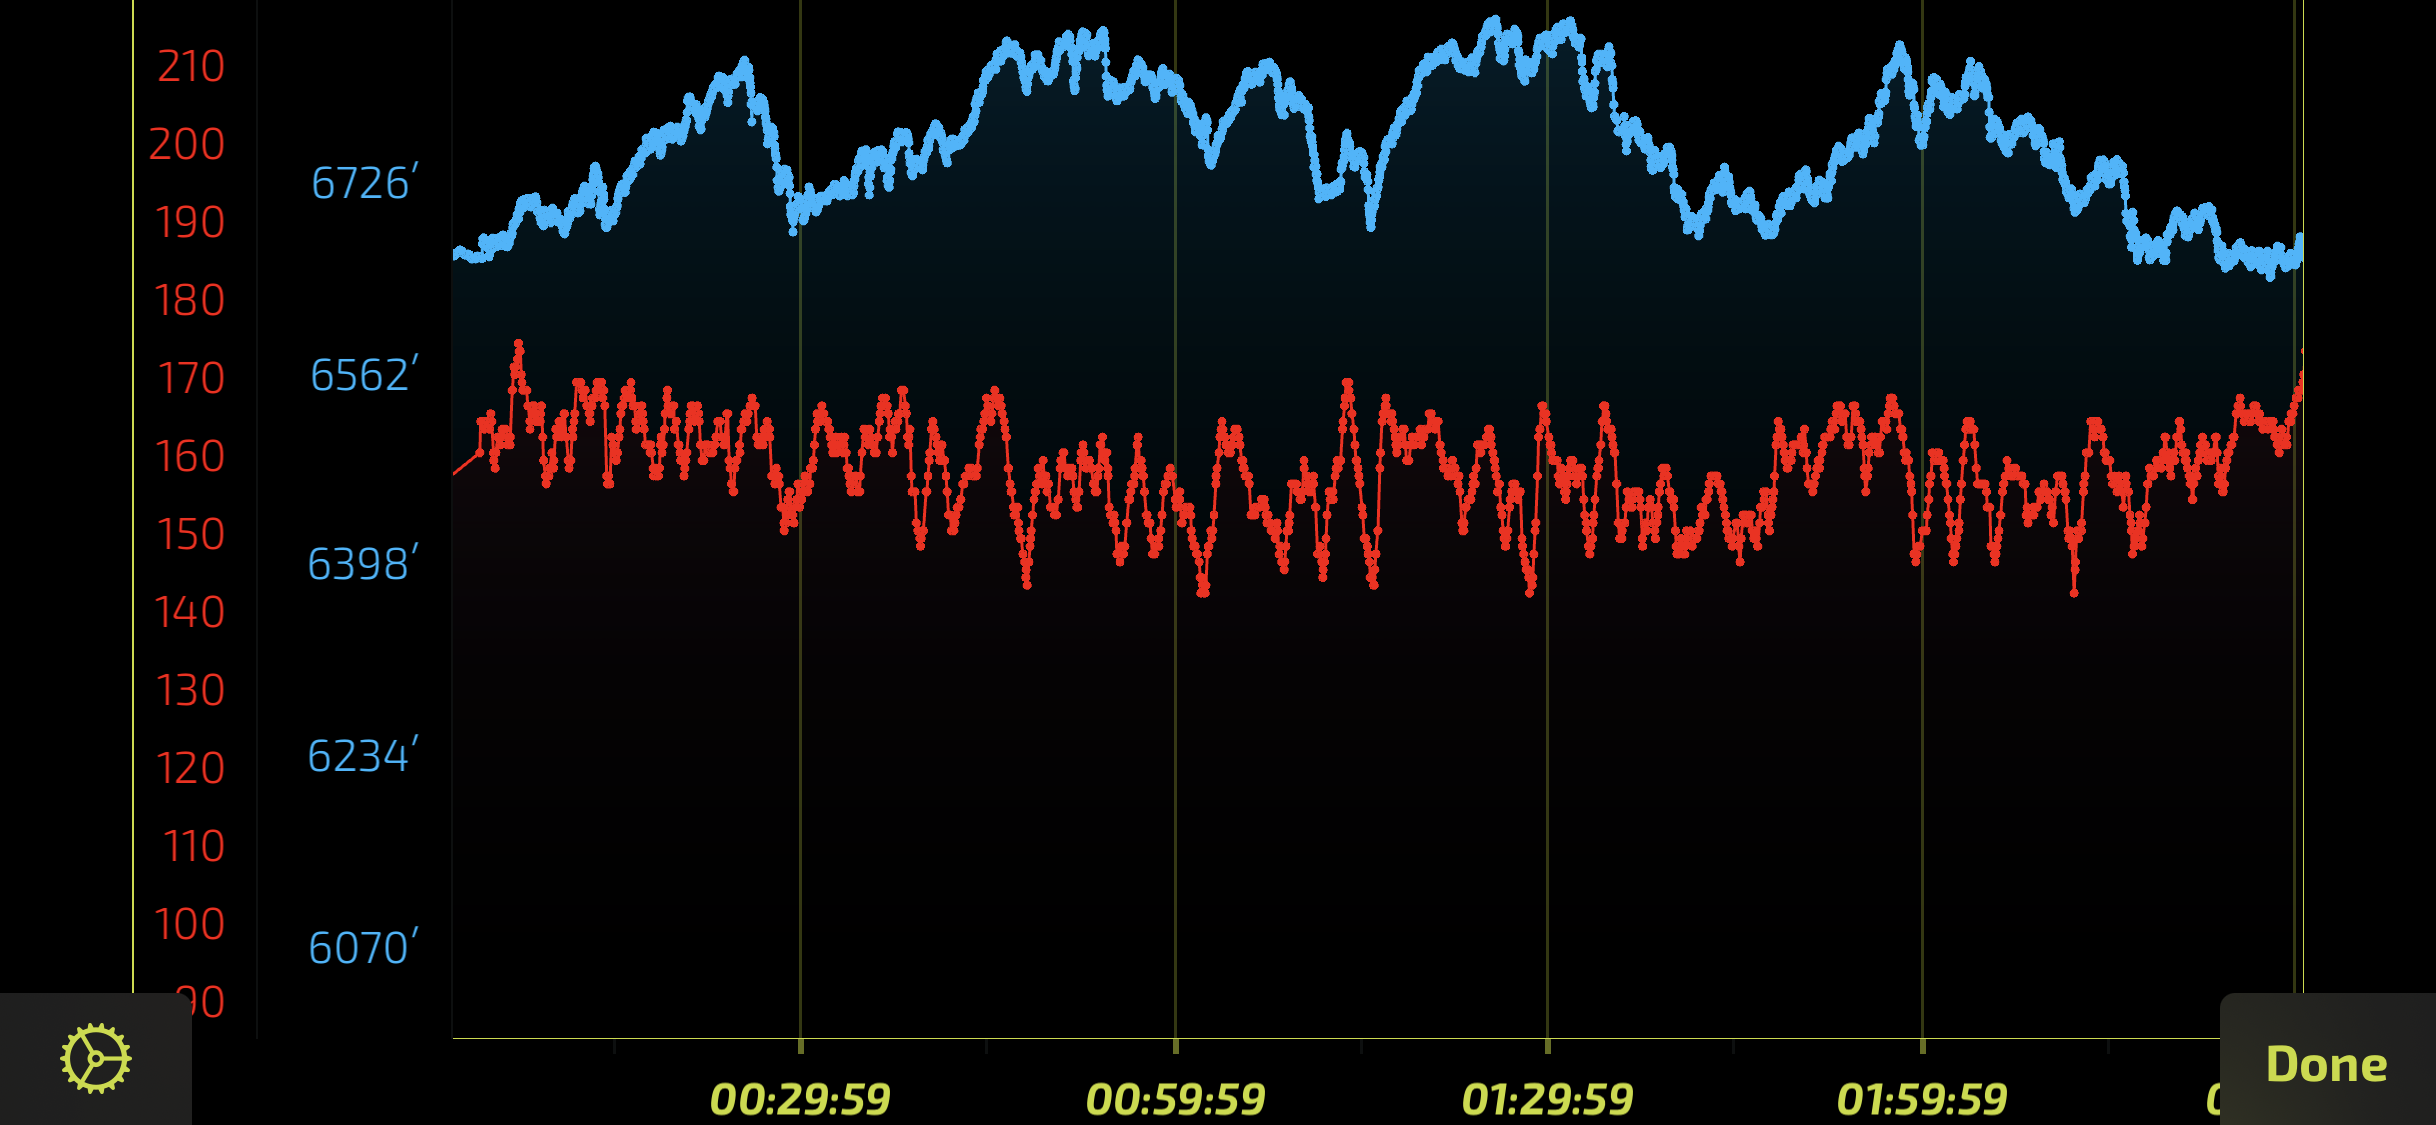 Elevation and heart rate graph.